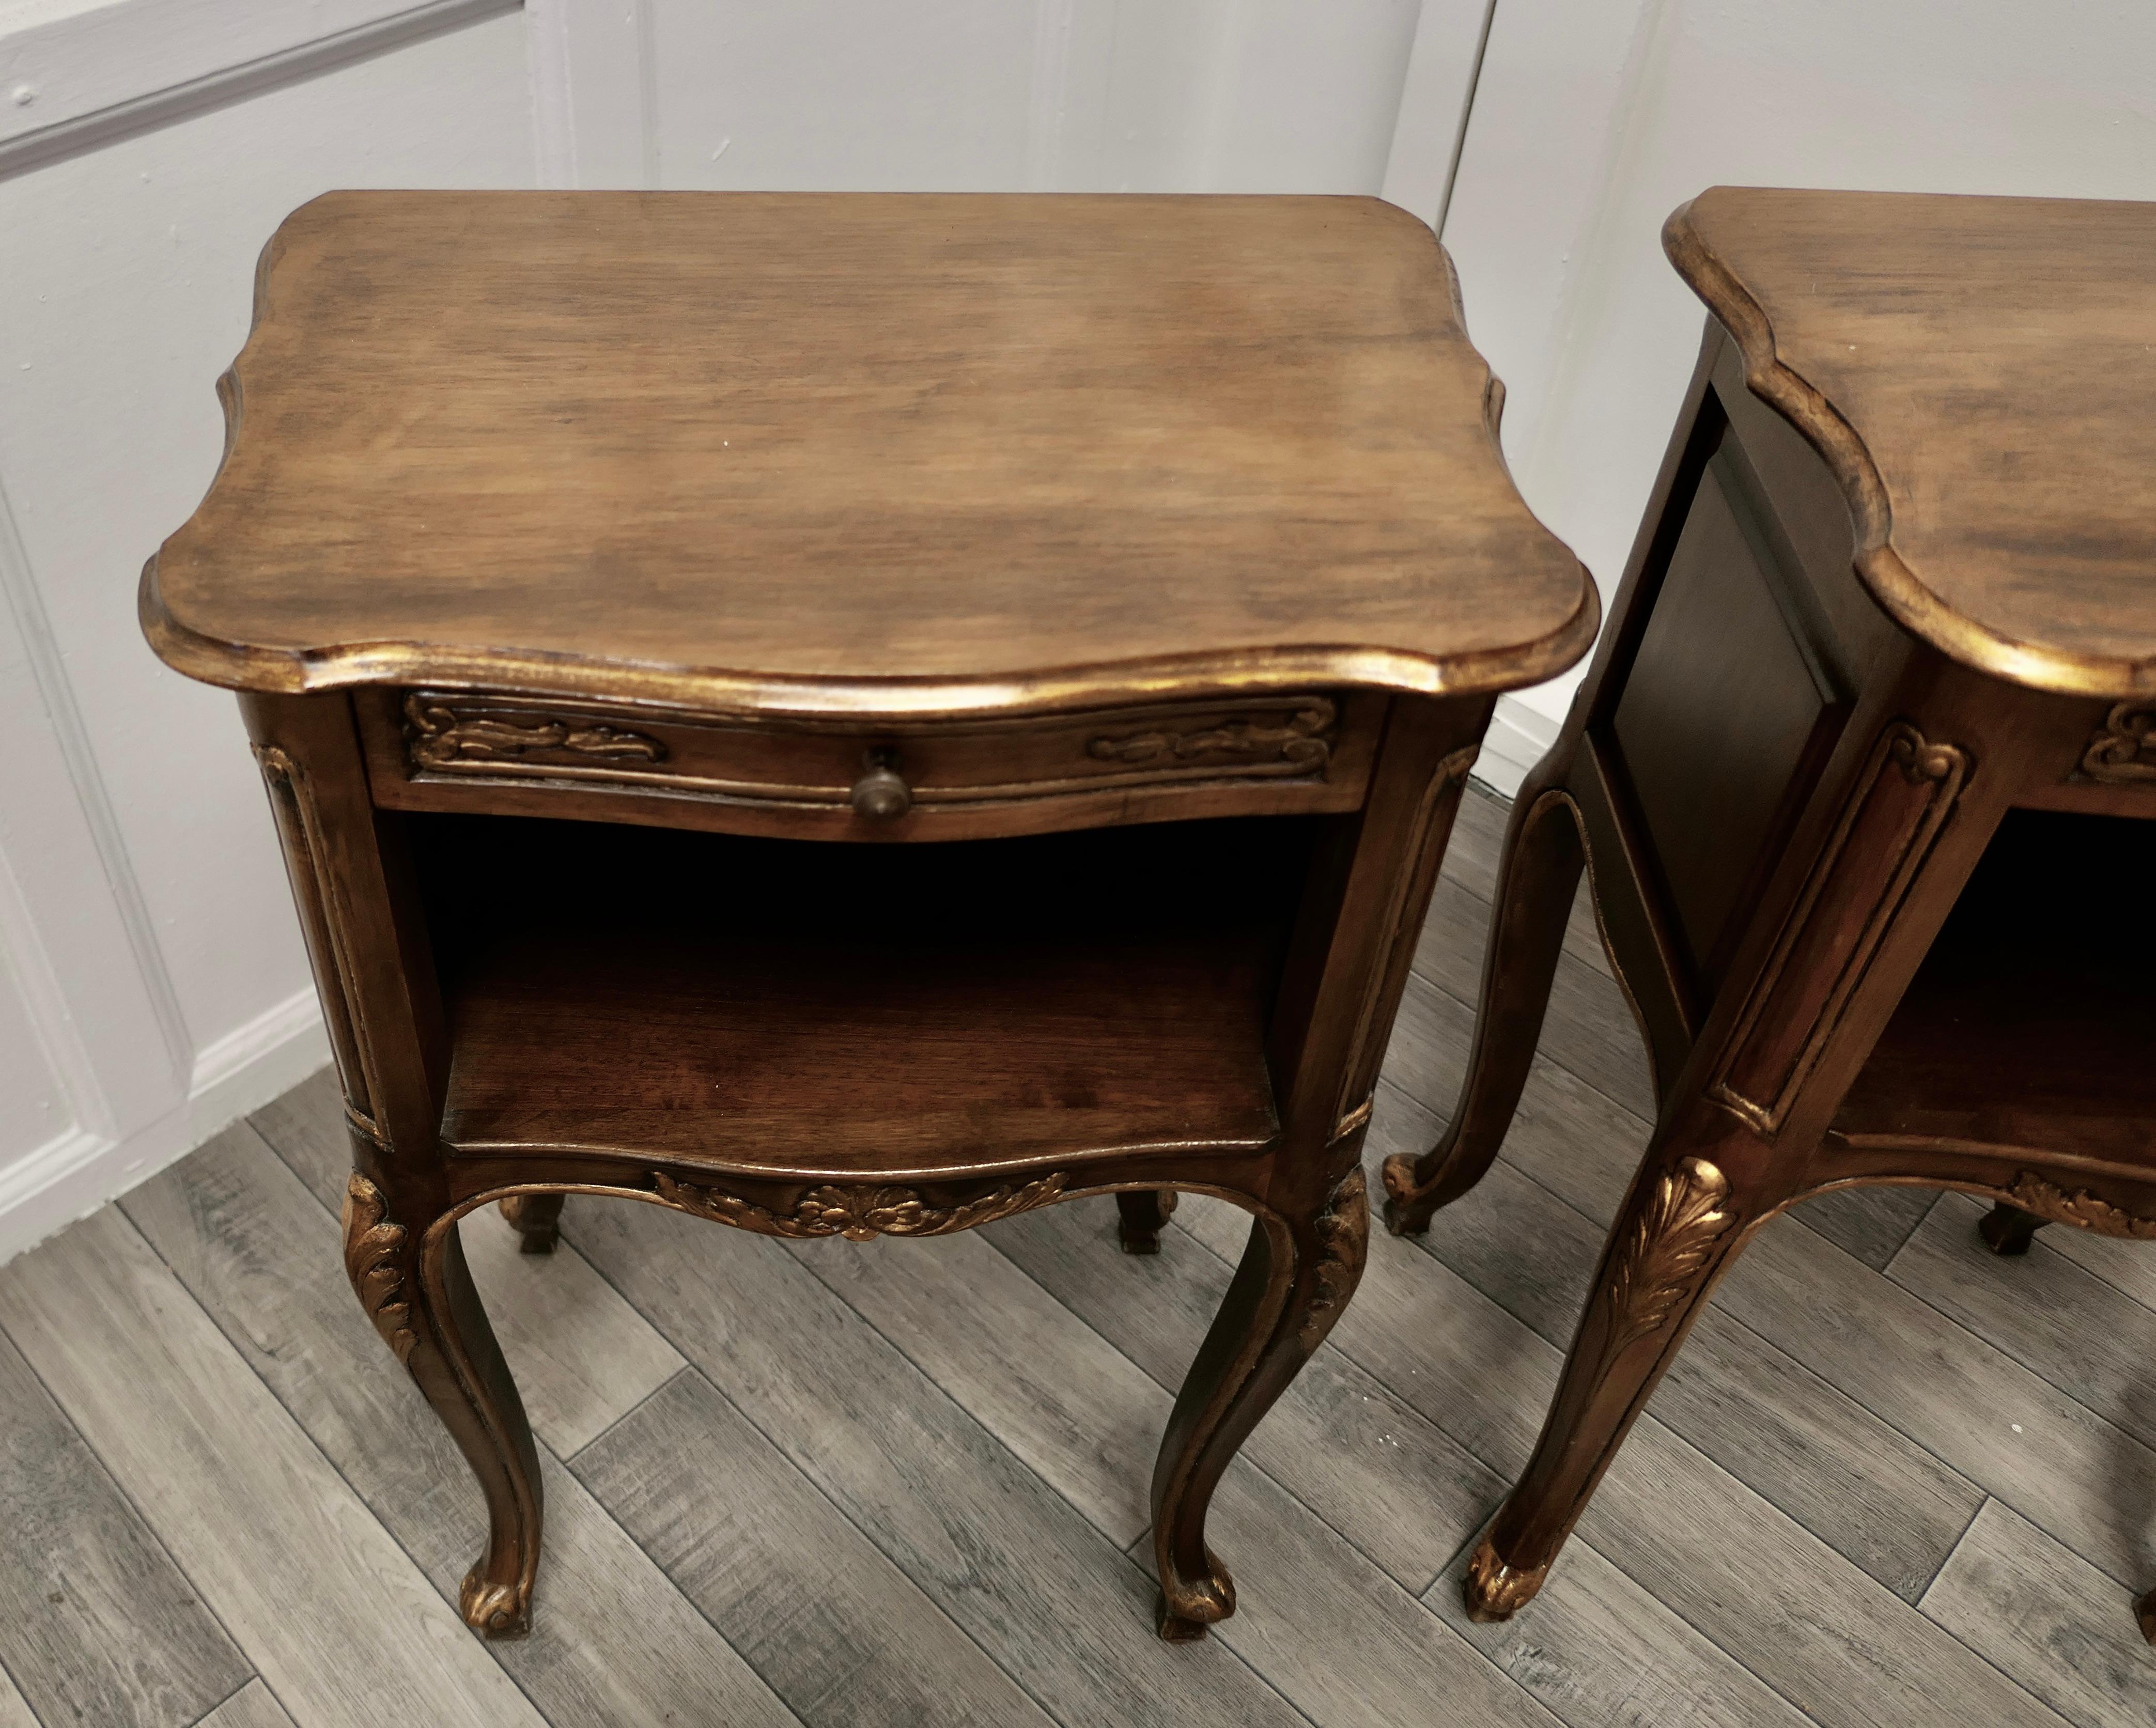 Pair of French Walnut Gilt Bedside Cabinets 

This is a pretty pair of cabinets or chevets, they are made in Walnut and have a shaped top with an open book shelf and a drawer standing on slim cabriole legs
The cabinets are decorated in the rococo